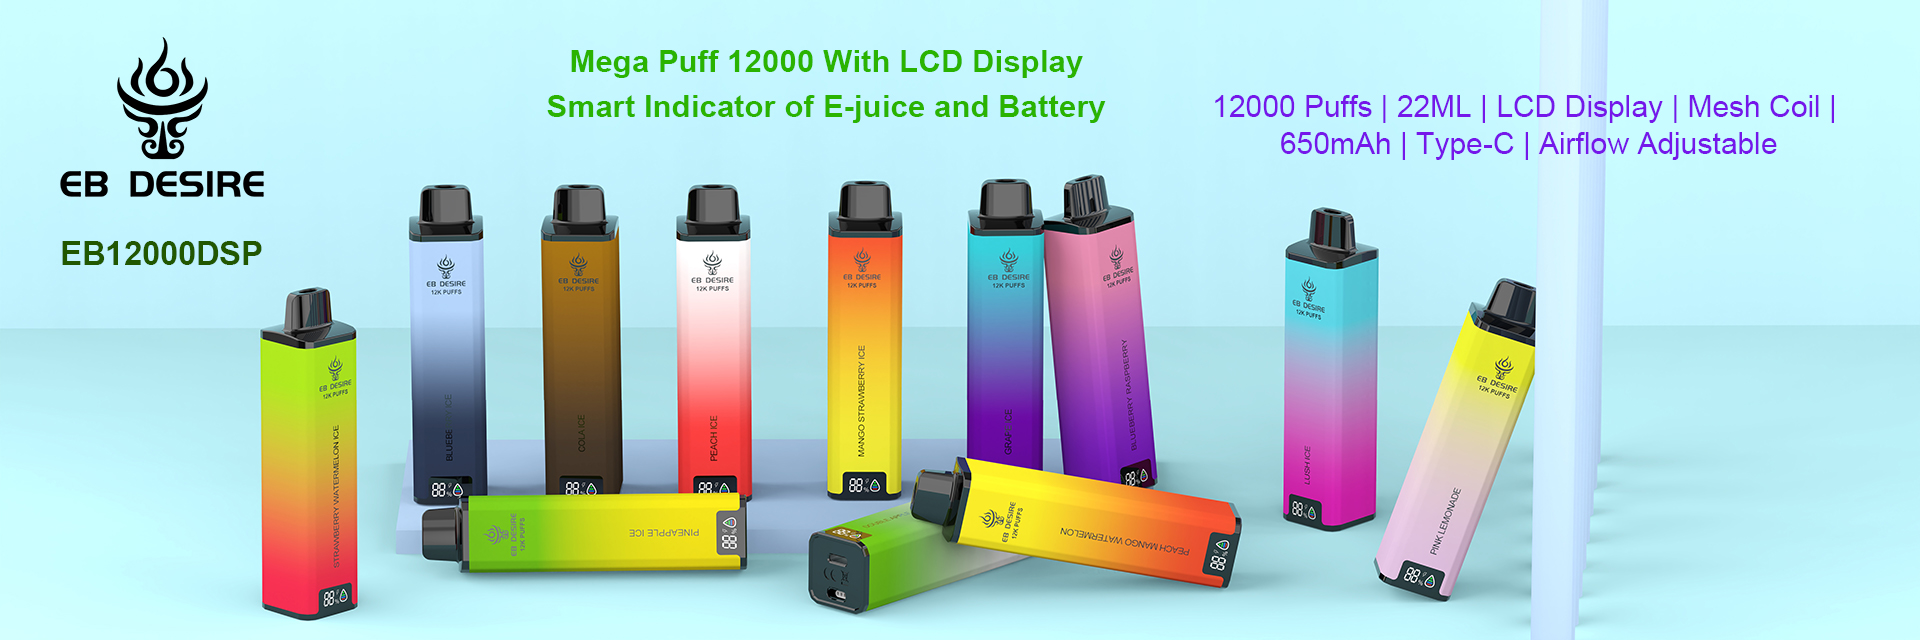 EB DESIRE Innovative Puff 12000 Disposable Vape With LCD Display